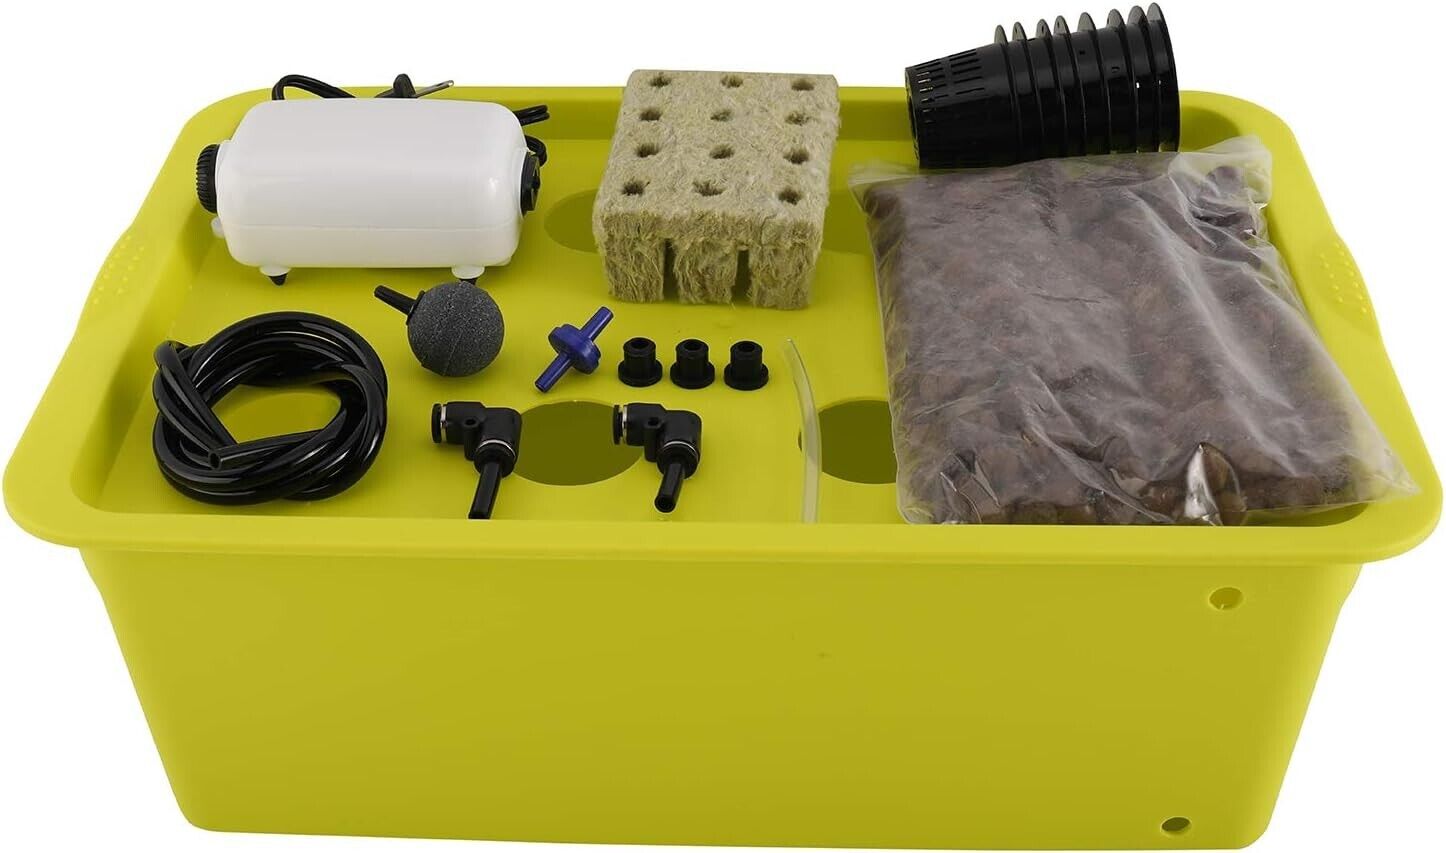 Hydroponic System Growing Kit 8 Site Self Watering Indoor DWC Hydroponic System